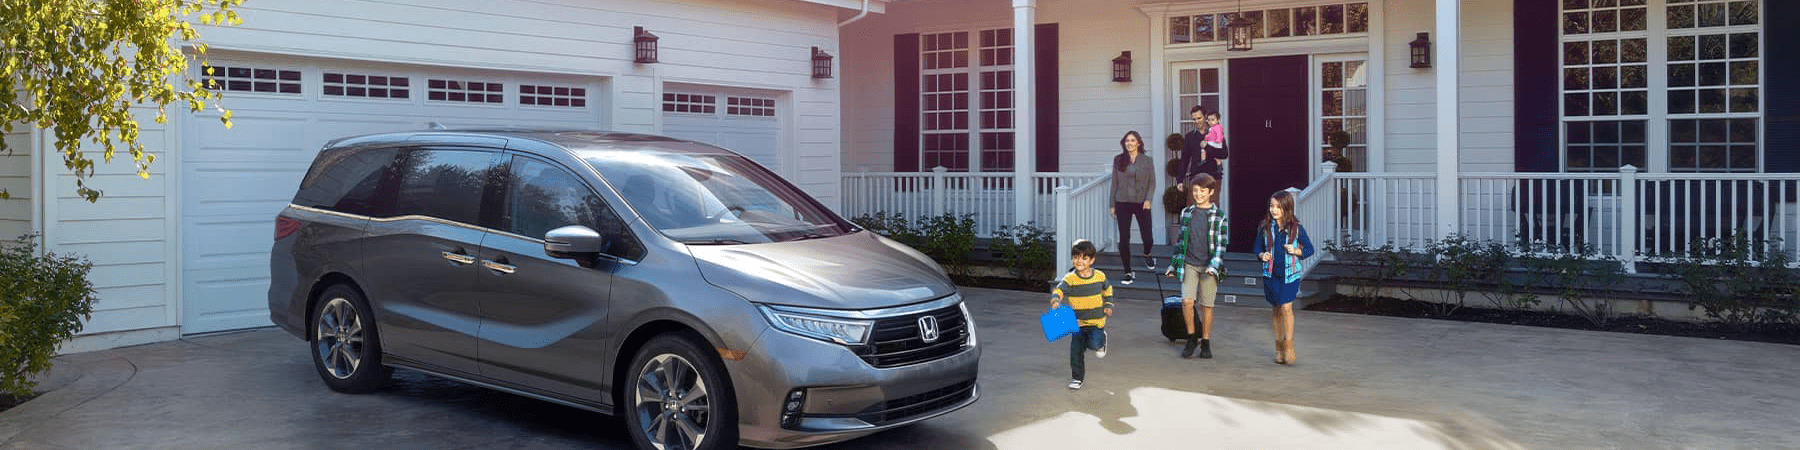 2021 Silver Honda Odyssey parked in front of a white home with black shutters